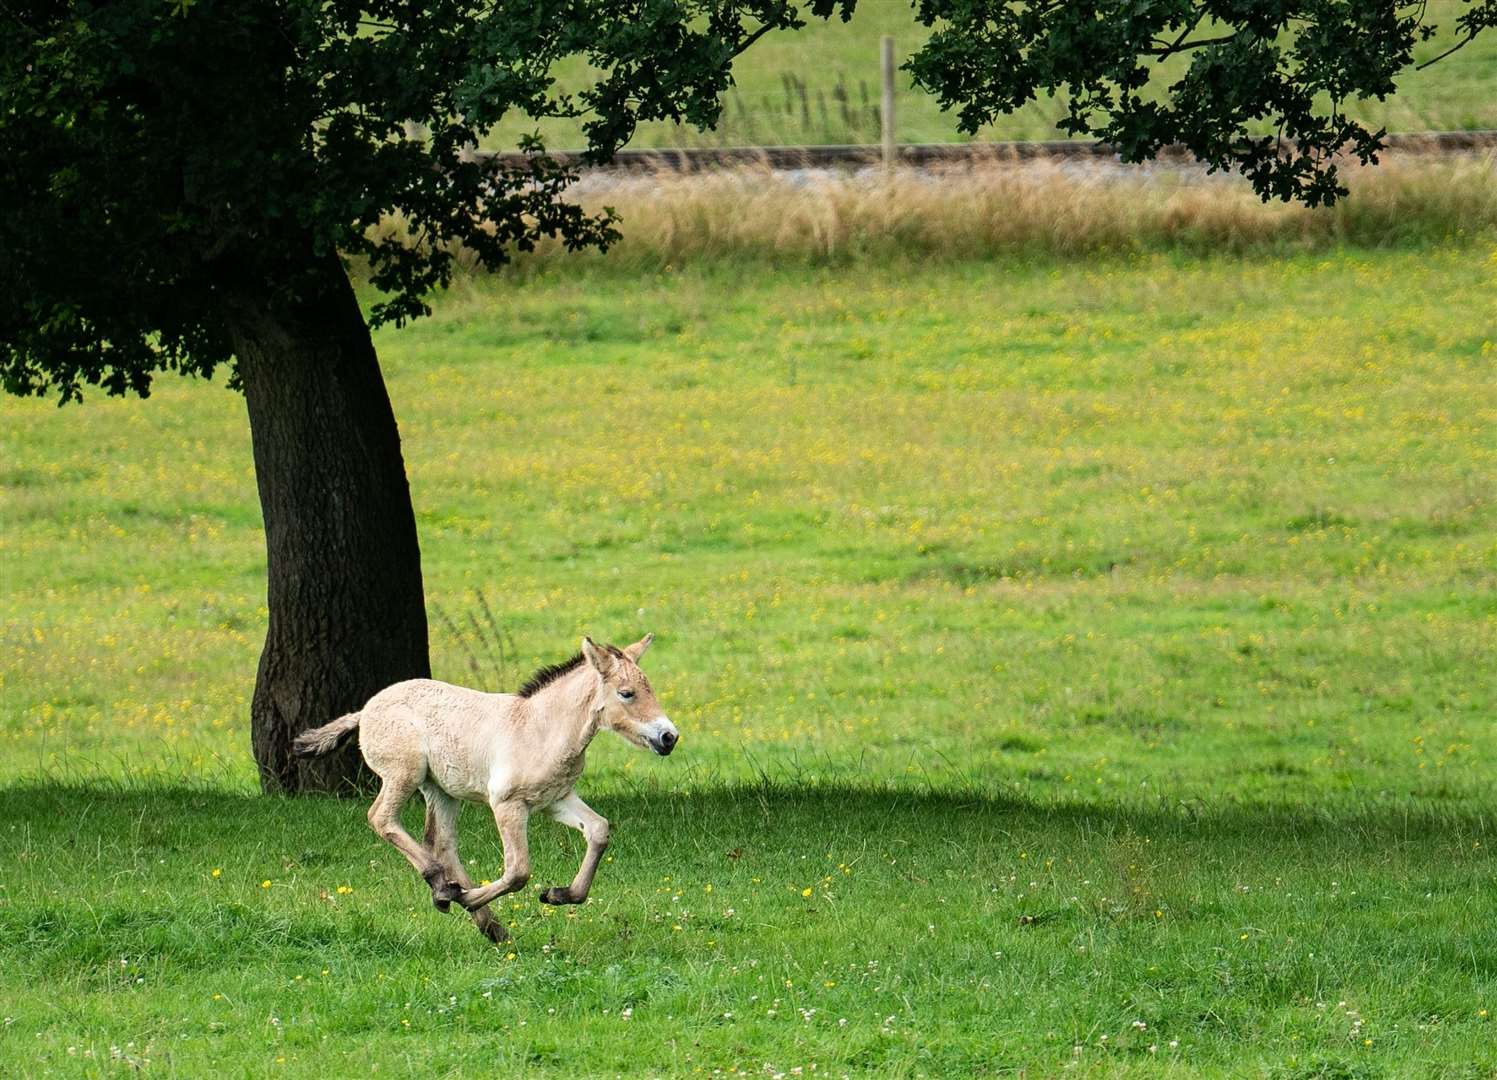 Sooton is learning to gallop (ZSL Whipsnade Zoo/PA)